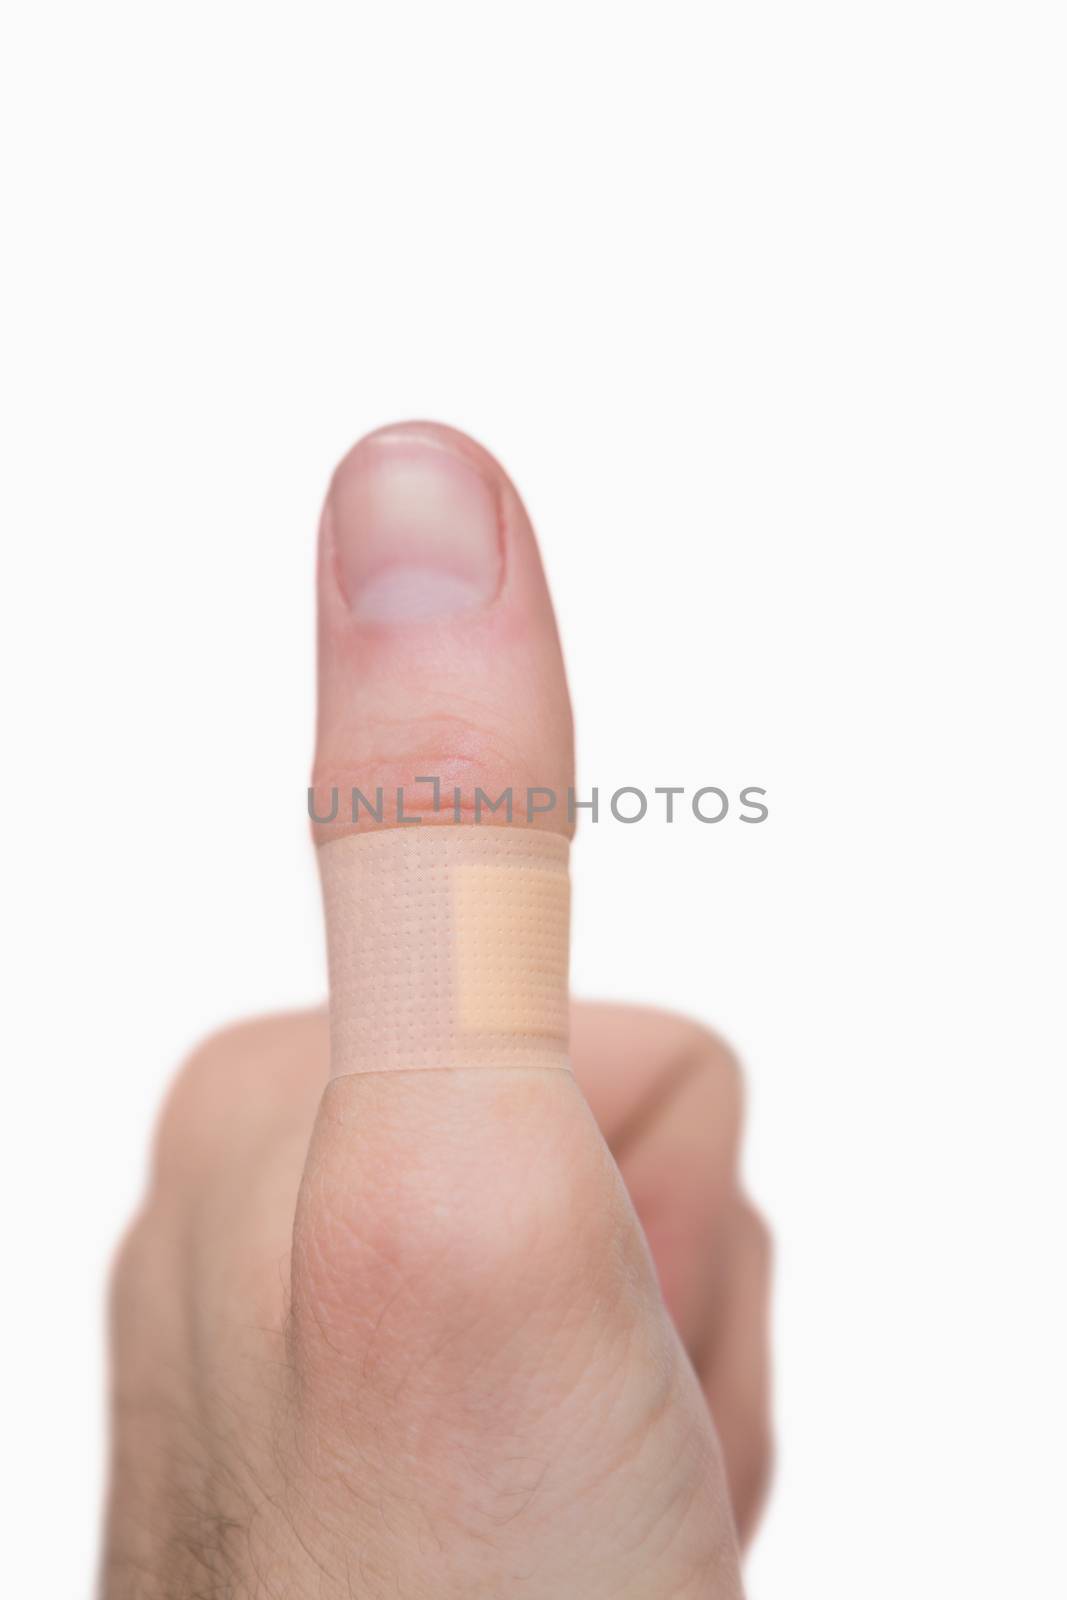 Closeup of thumbs up sign by Wavebreakmedia